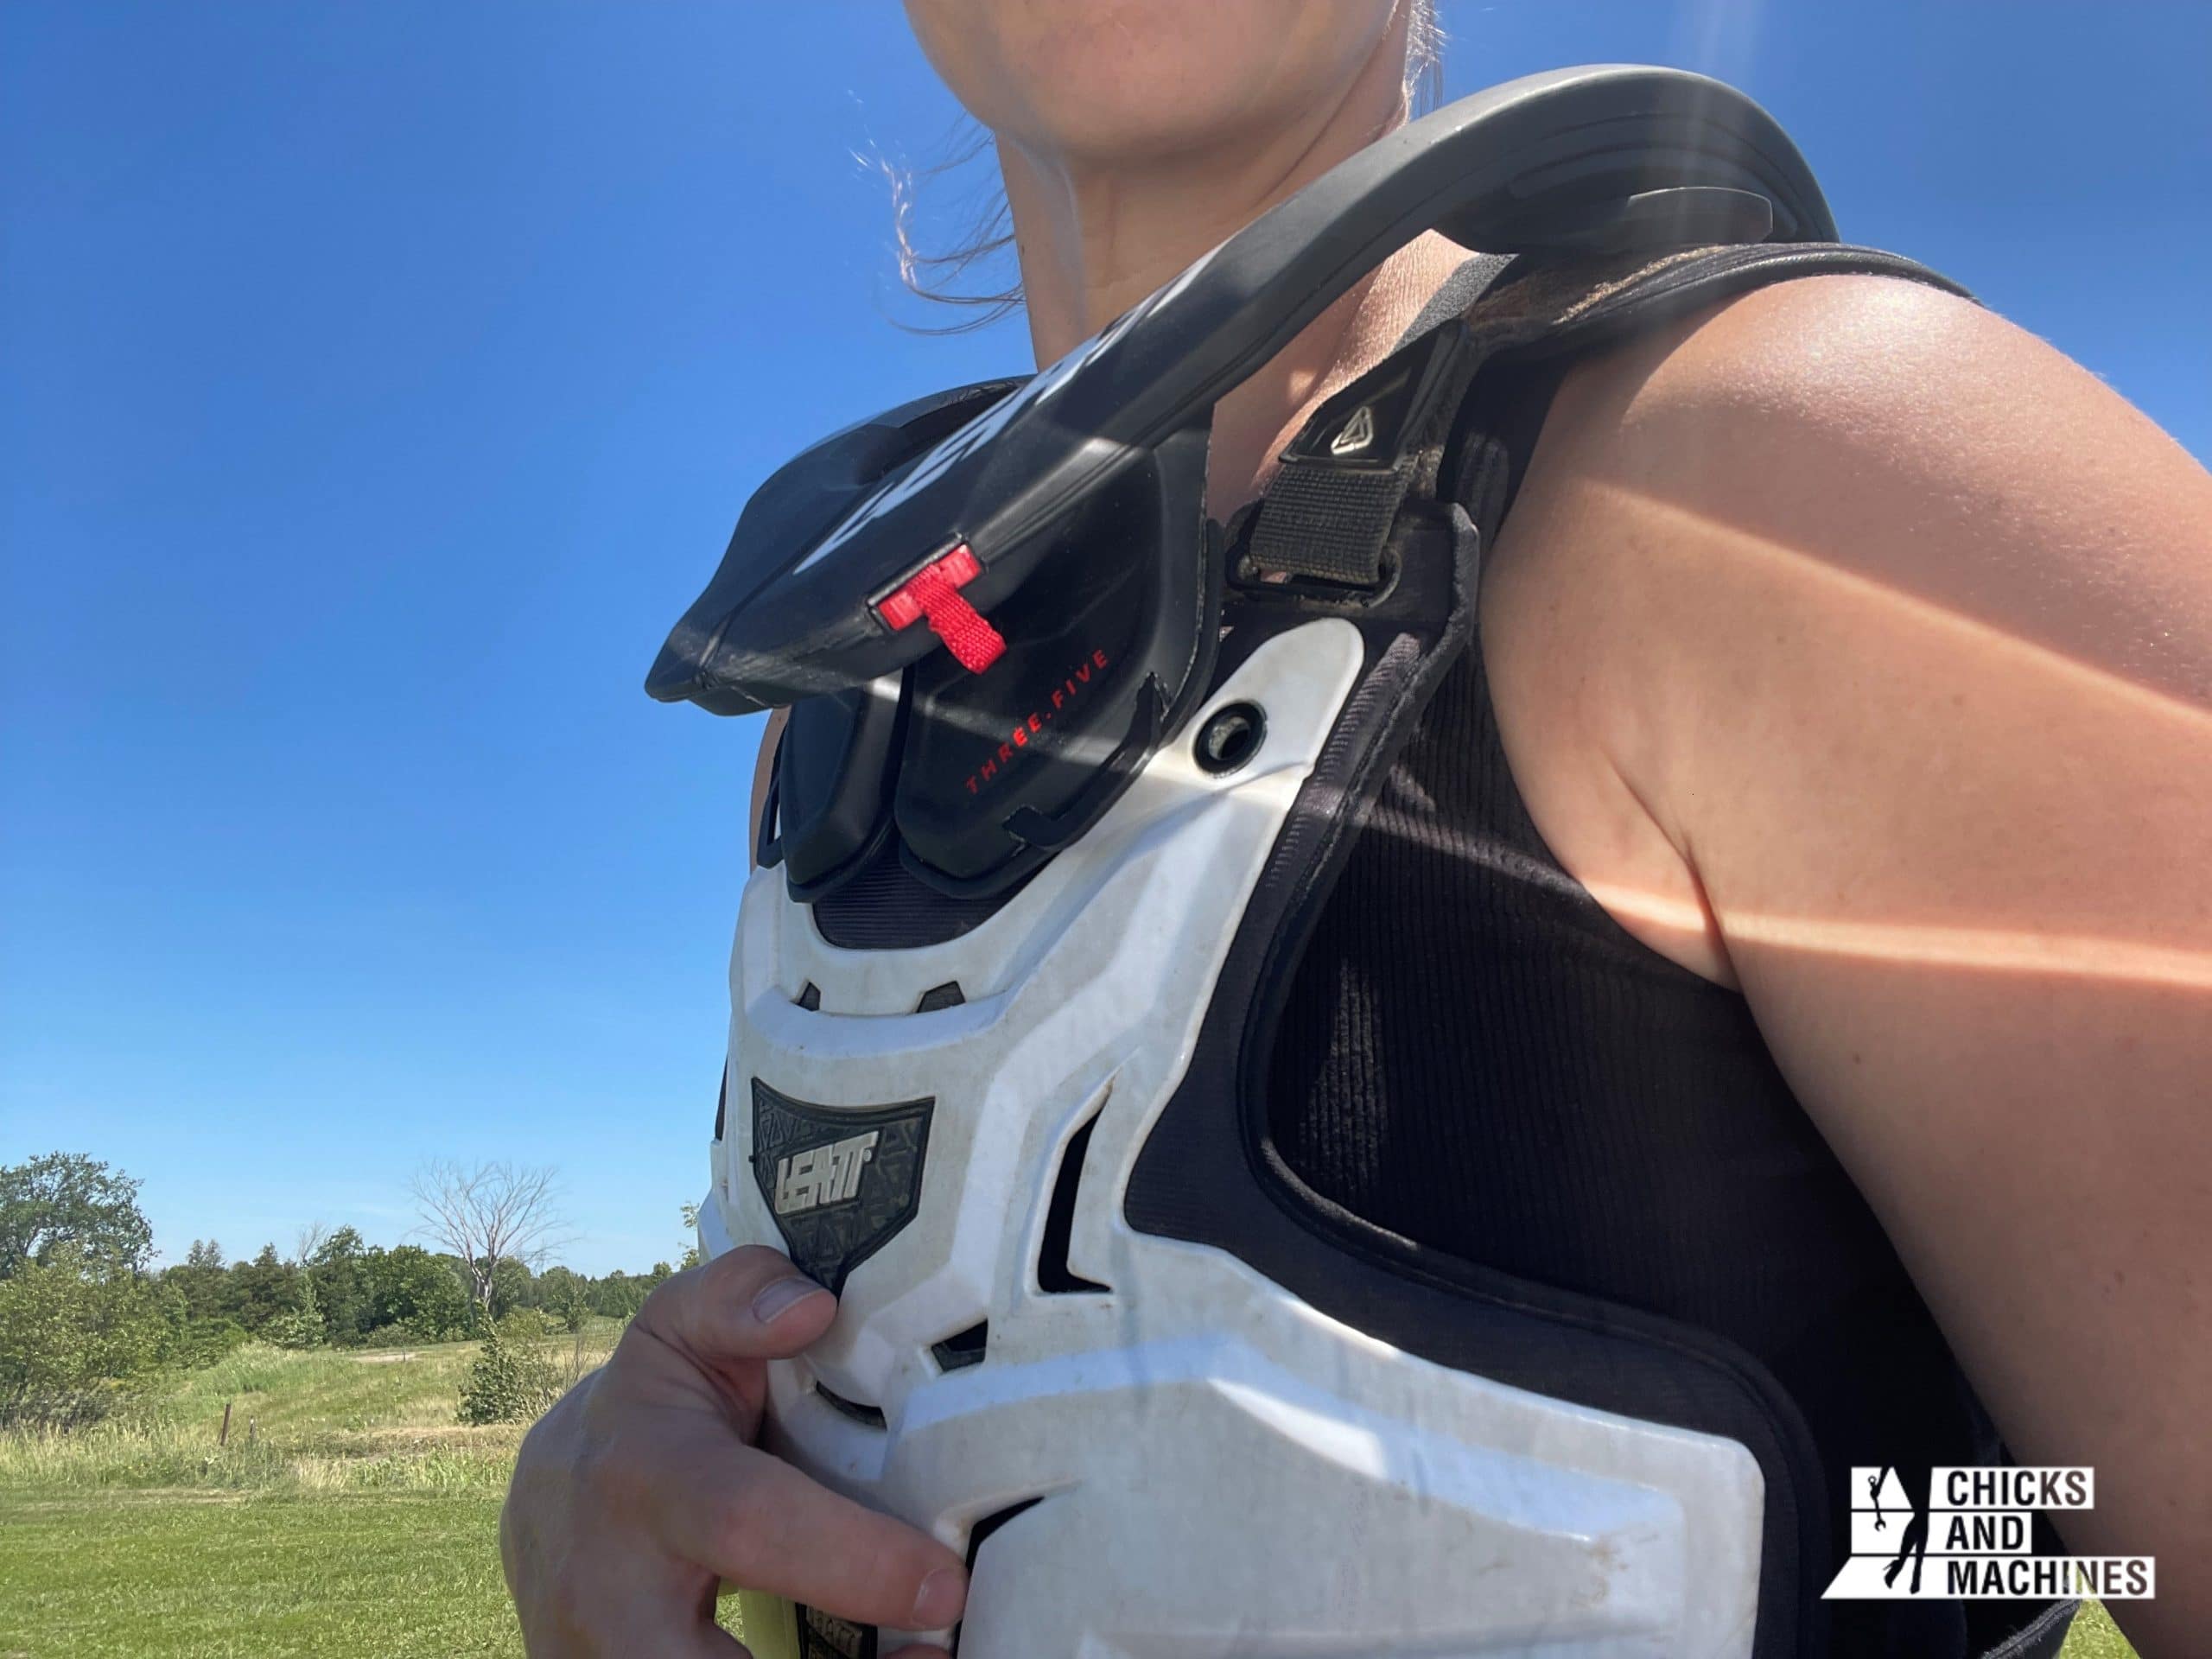 Cindy wearing the Leatt GPX 3.5 neck brace and the chest protector